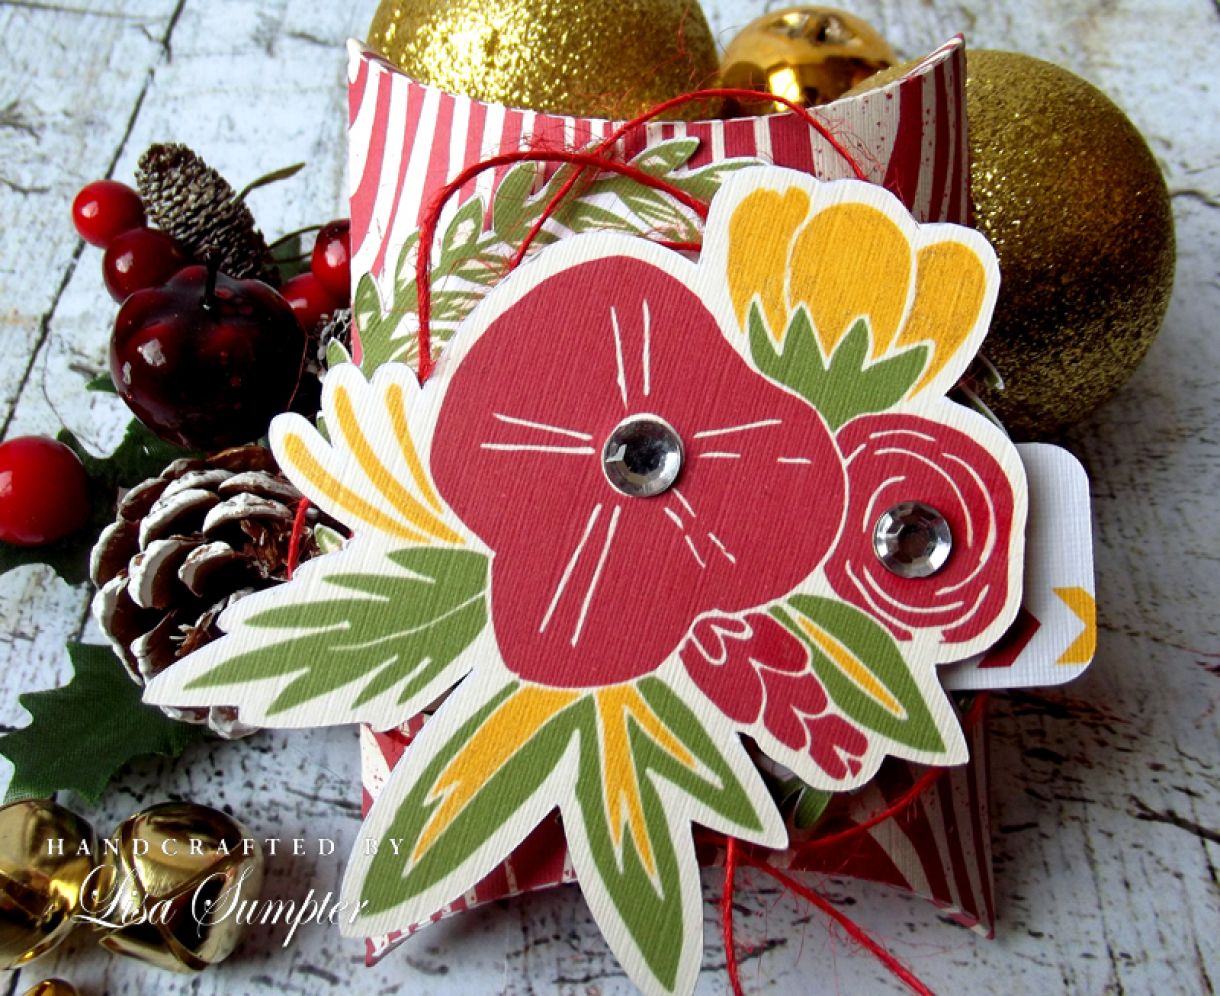 Lisa  Sumpter For  Papermill  Direct  Small  Gift  Wrapping  Ideas 2